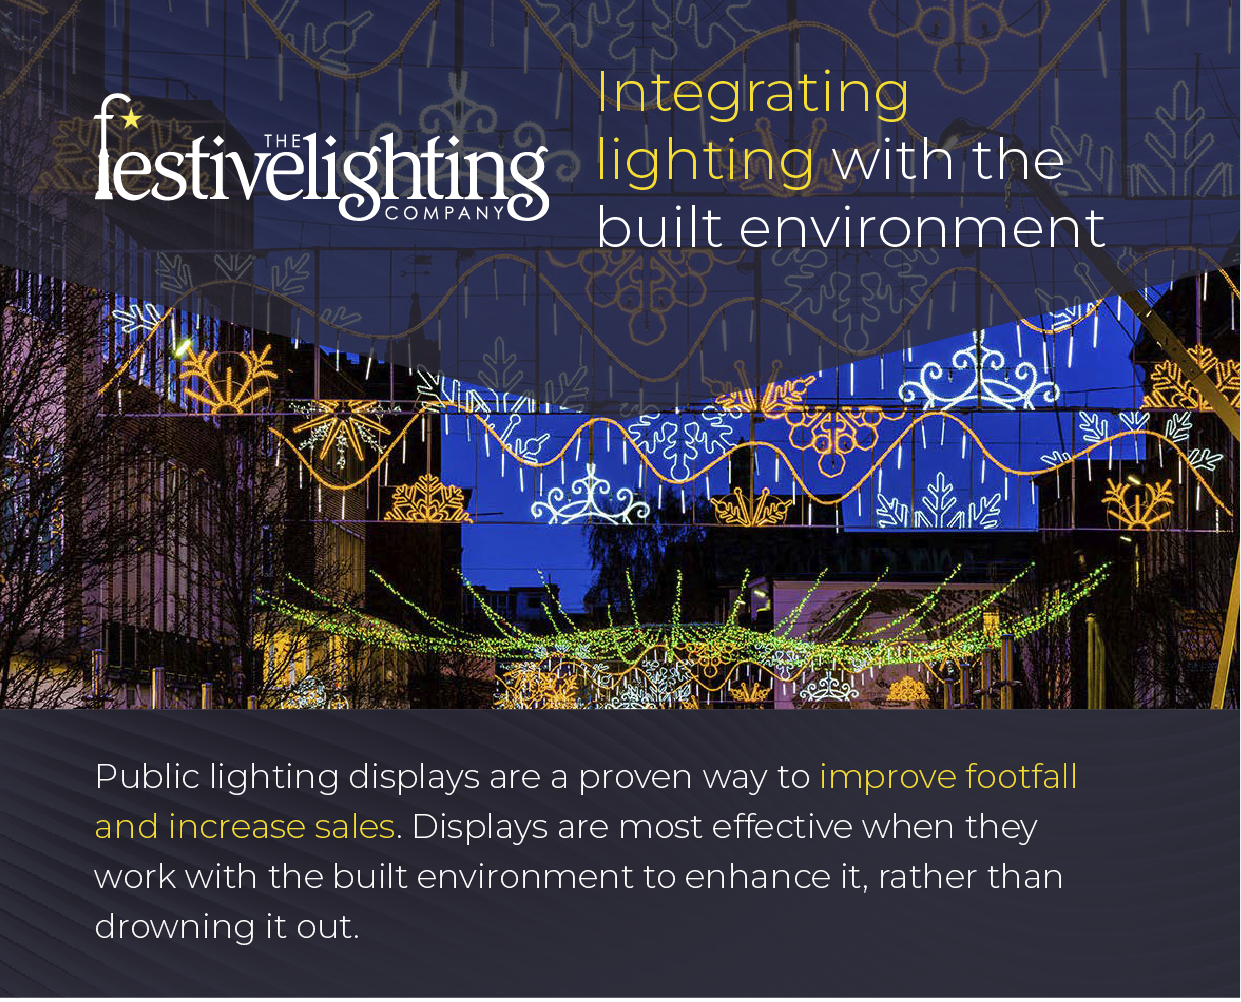 Festive-Lighting-Integrating-lighting-with-the-built-environment top